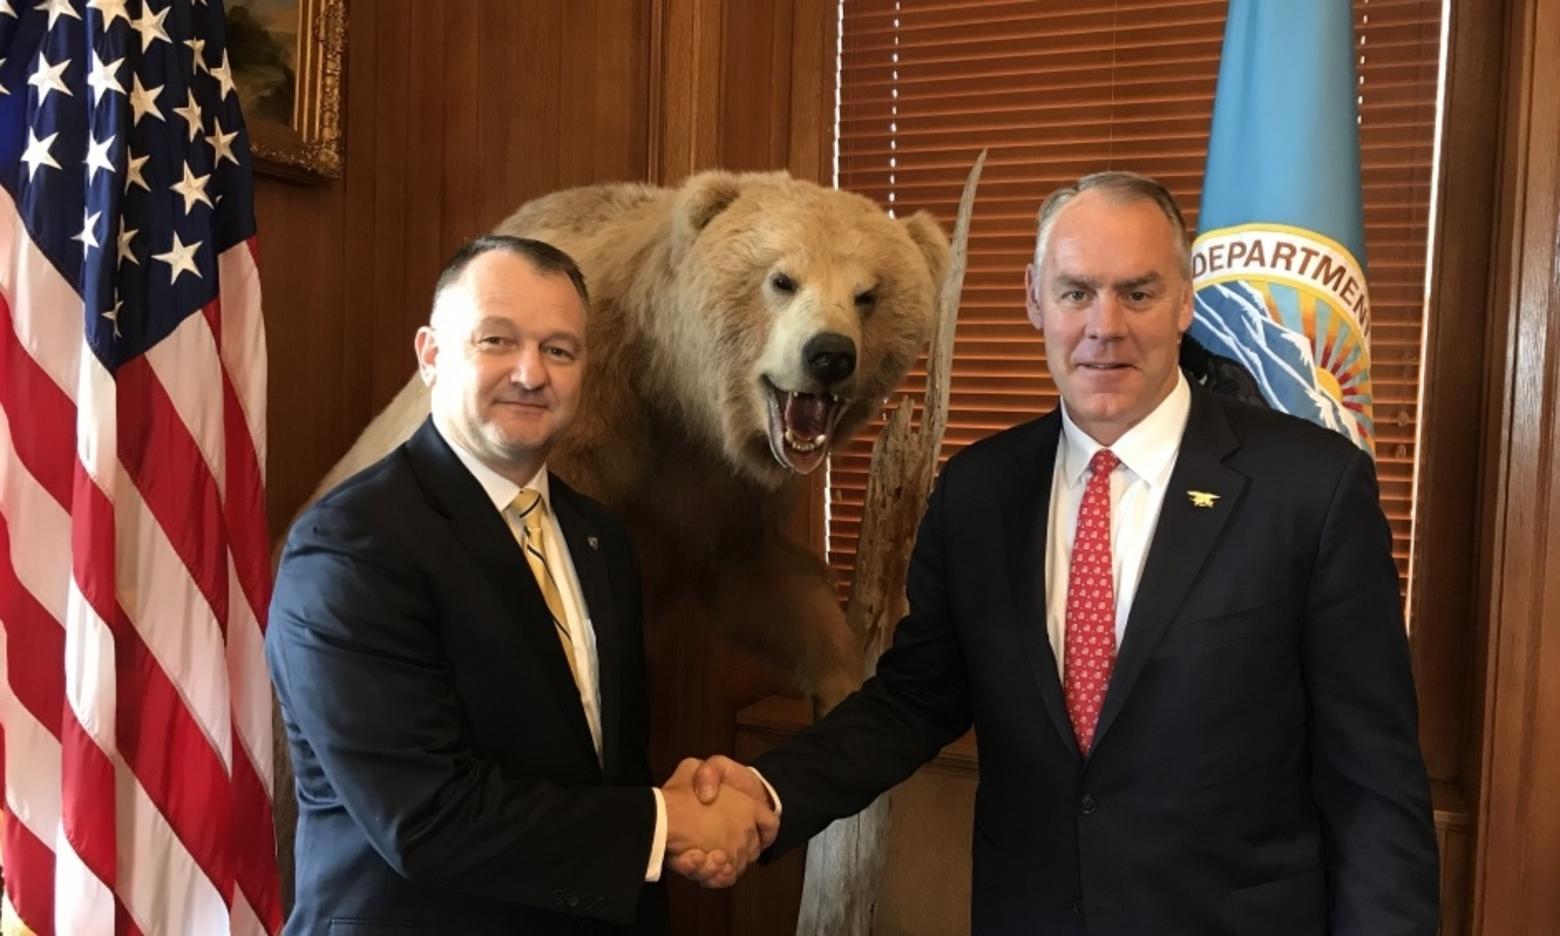 Interior Secretary Ryan Zinke gives Cameron "Cam" Sholly a congratulatory handshake after making him the next superintendent of Yellowstone. For Sholly, it is a homecoming.  He spent his high school years in the park while his father served as chief ranger. Photo courtesy U.S. Interior Department